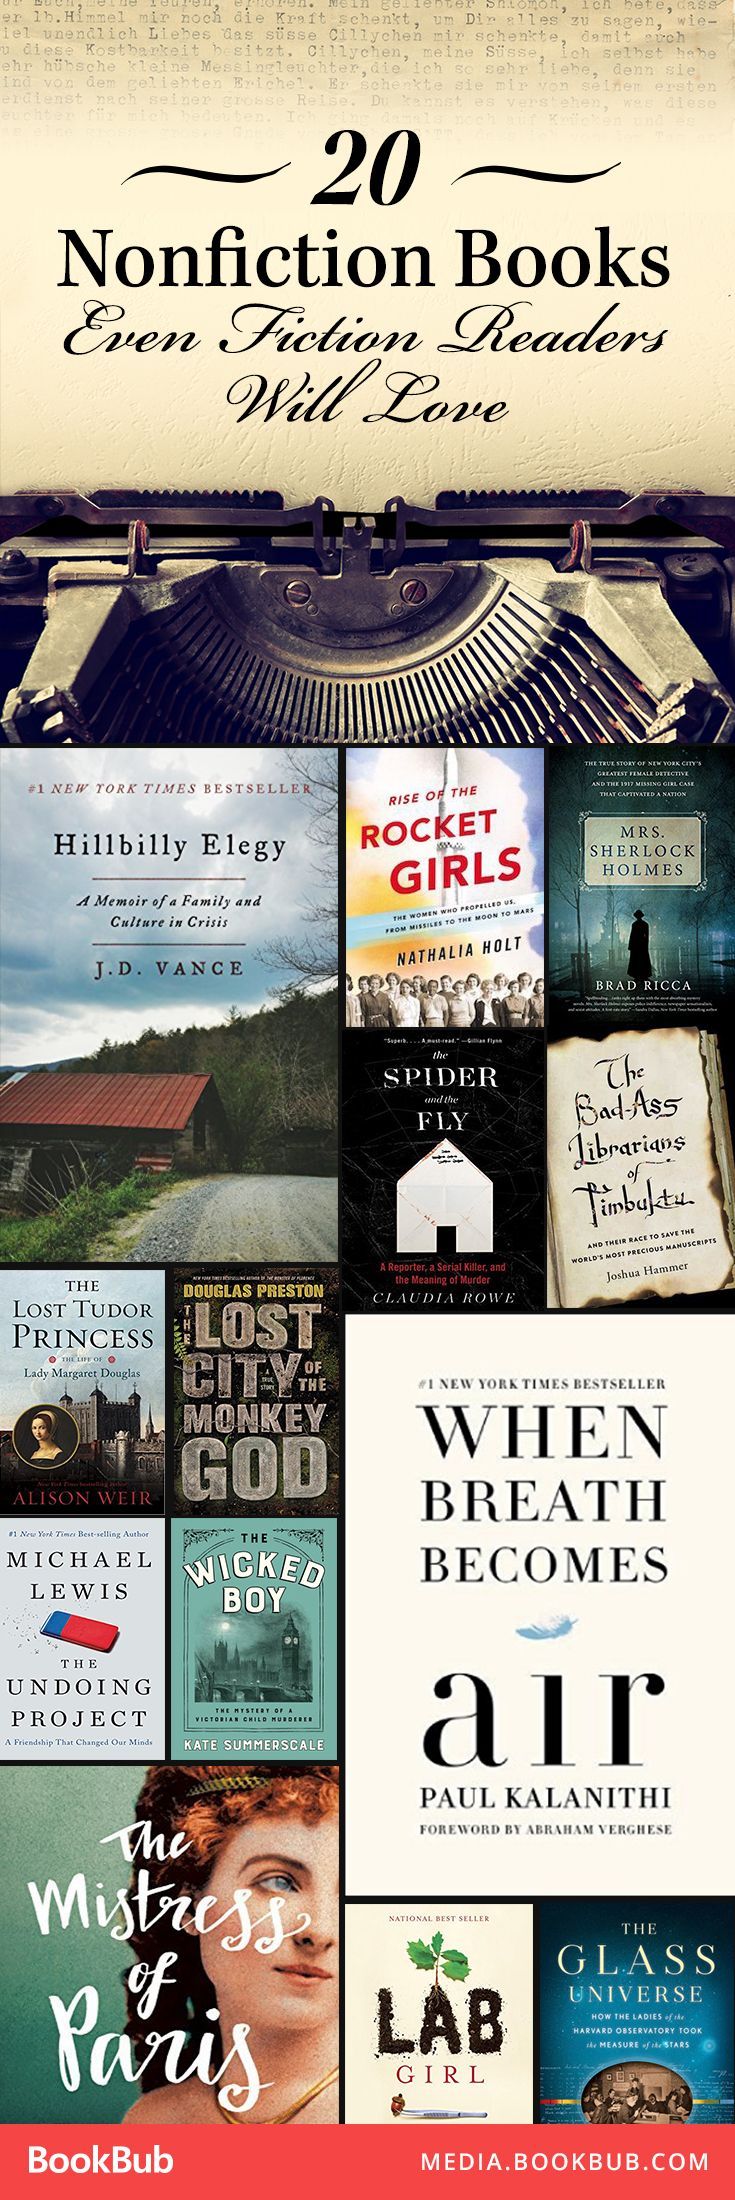 These nonfiction books feature true stories, including historical books about the Tudors and modern memoirs.